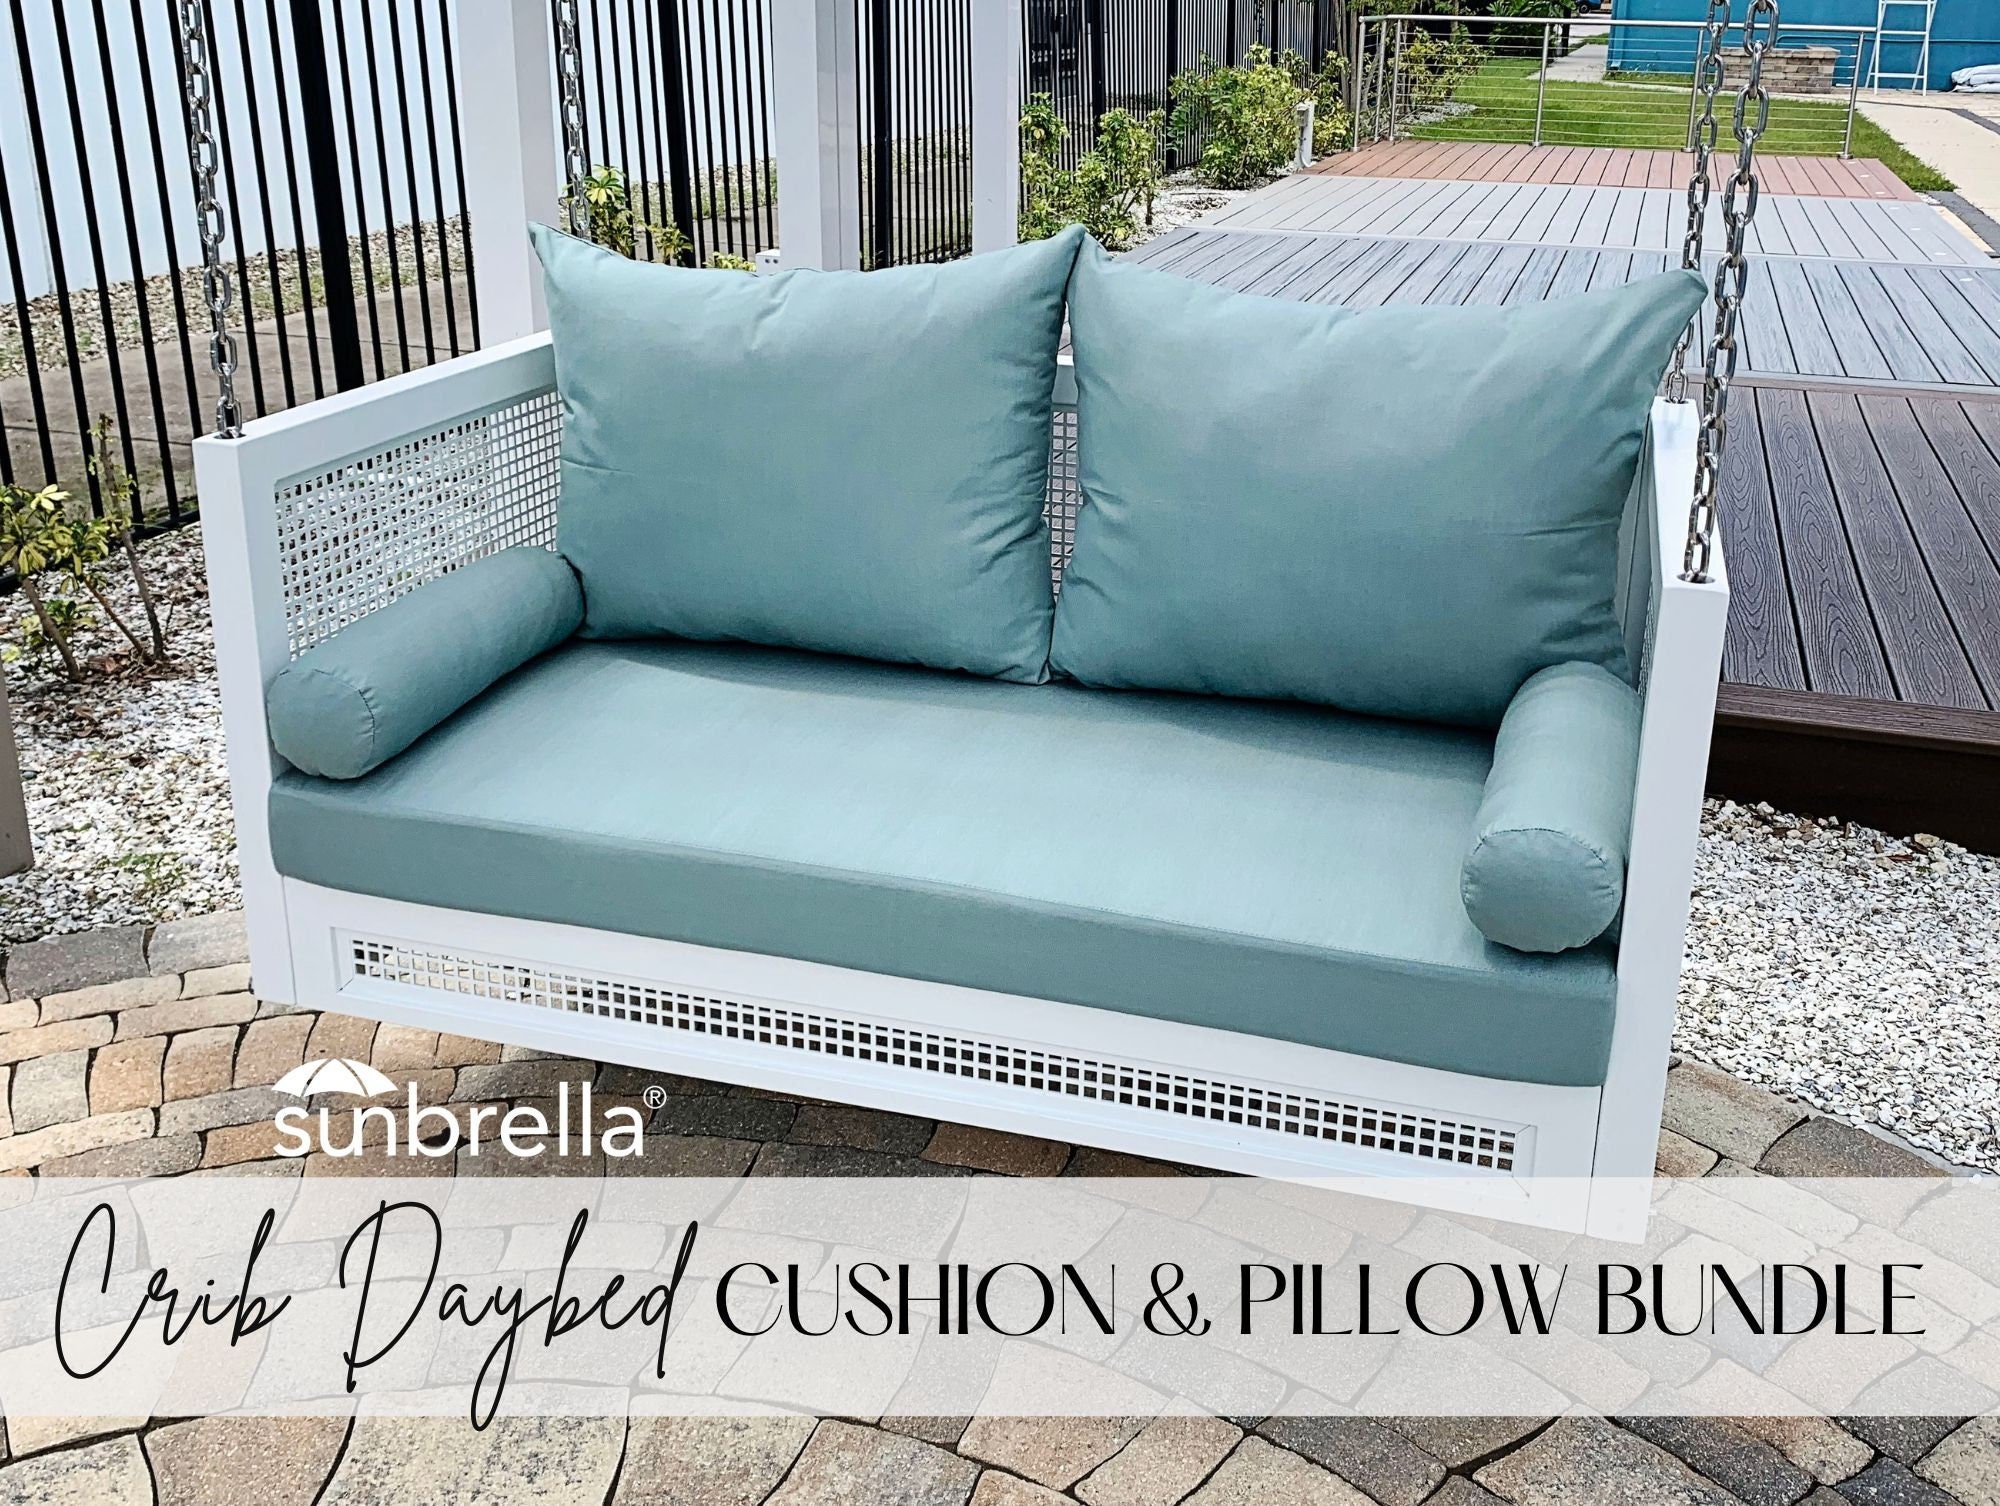 24 Square Pillow Insert – Vintage Porch Swings